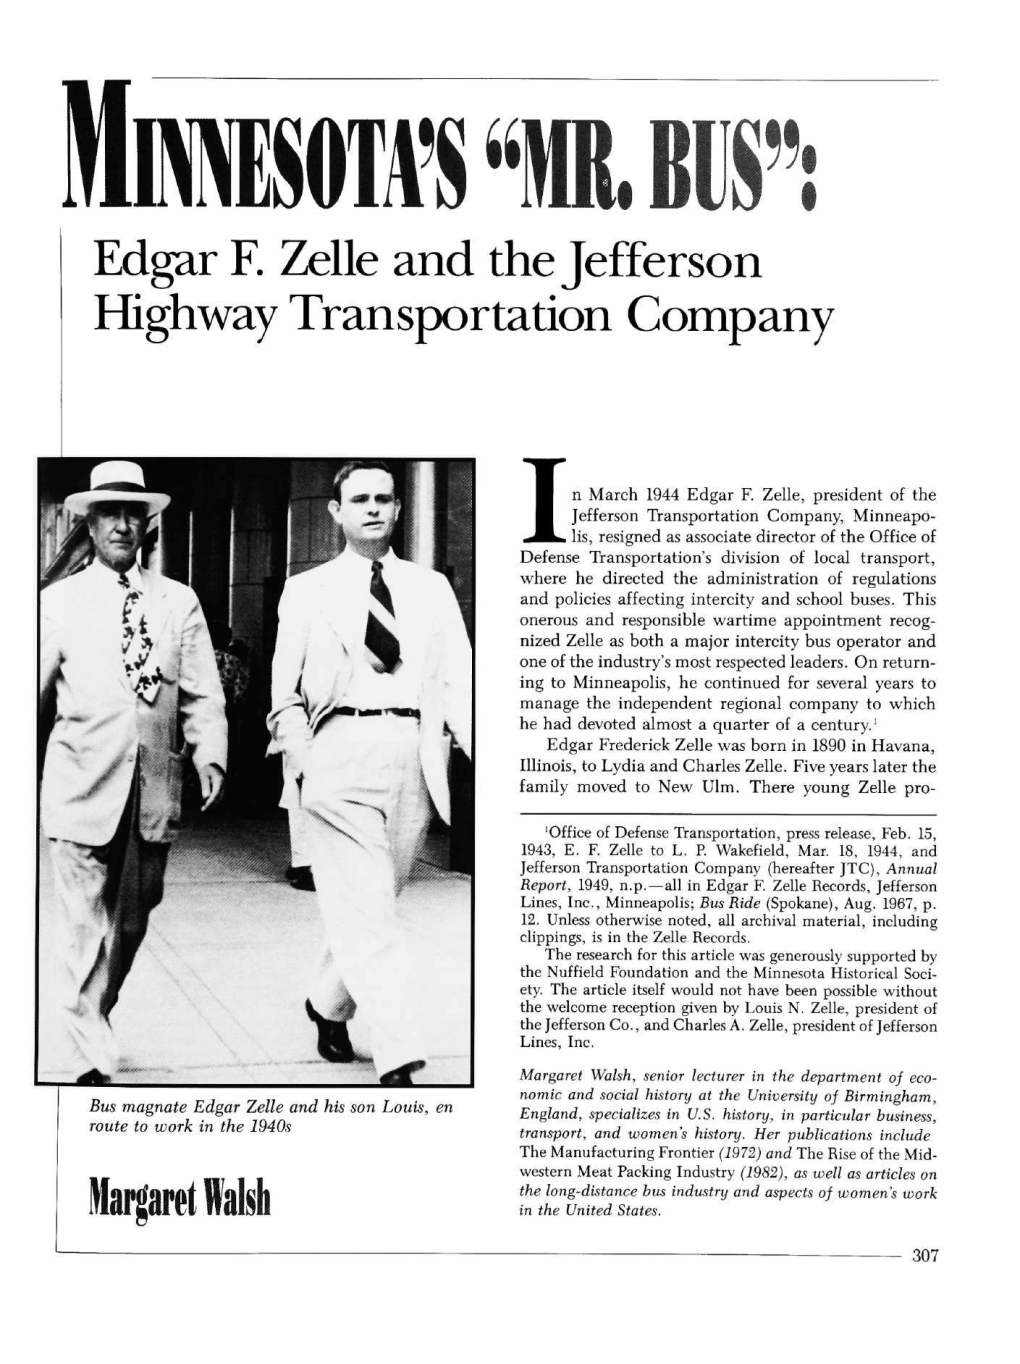 Edgar F. Zelle and the Jefferson Kqghway Transportation Company